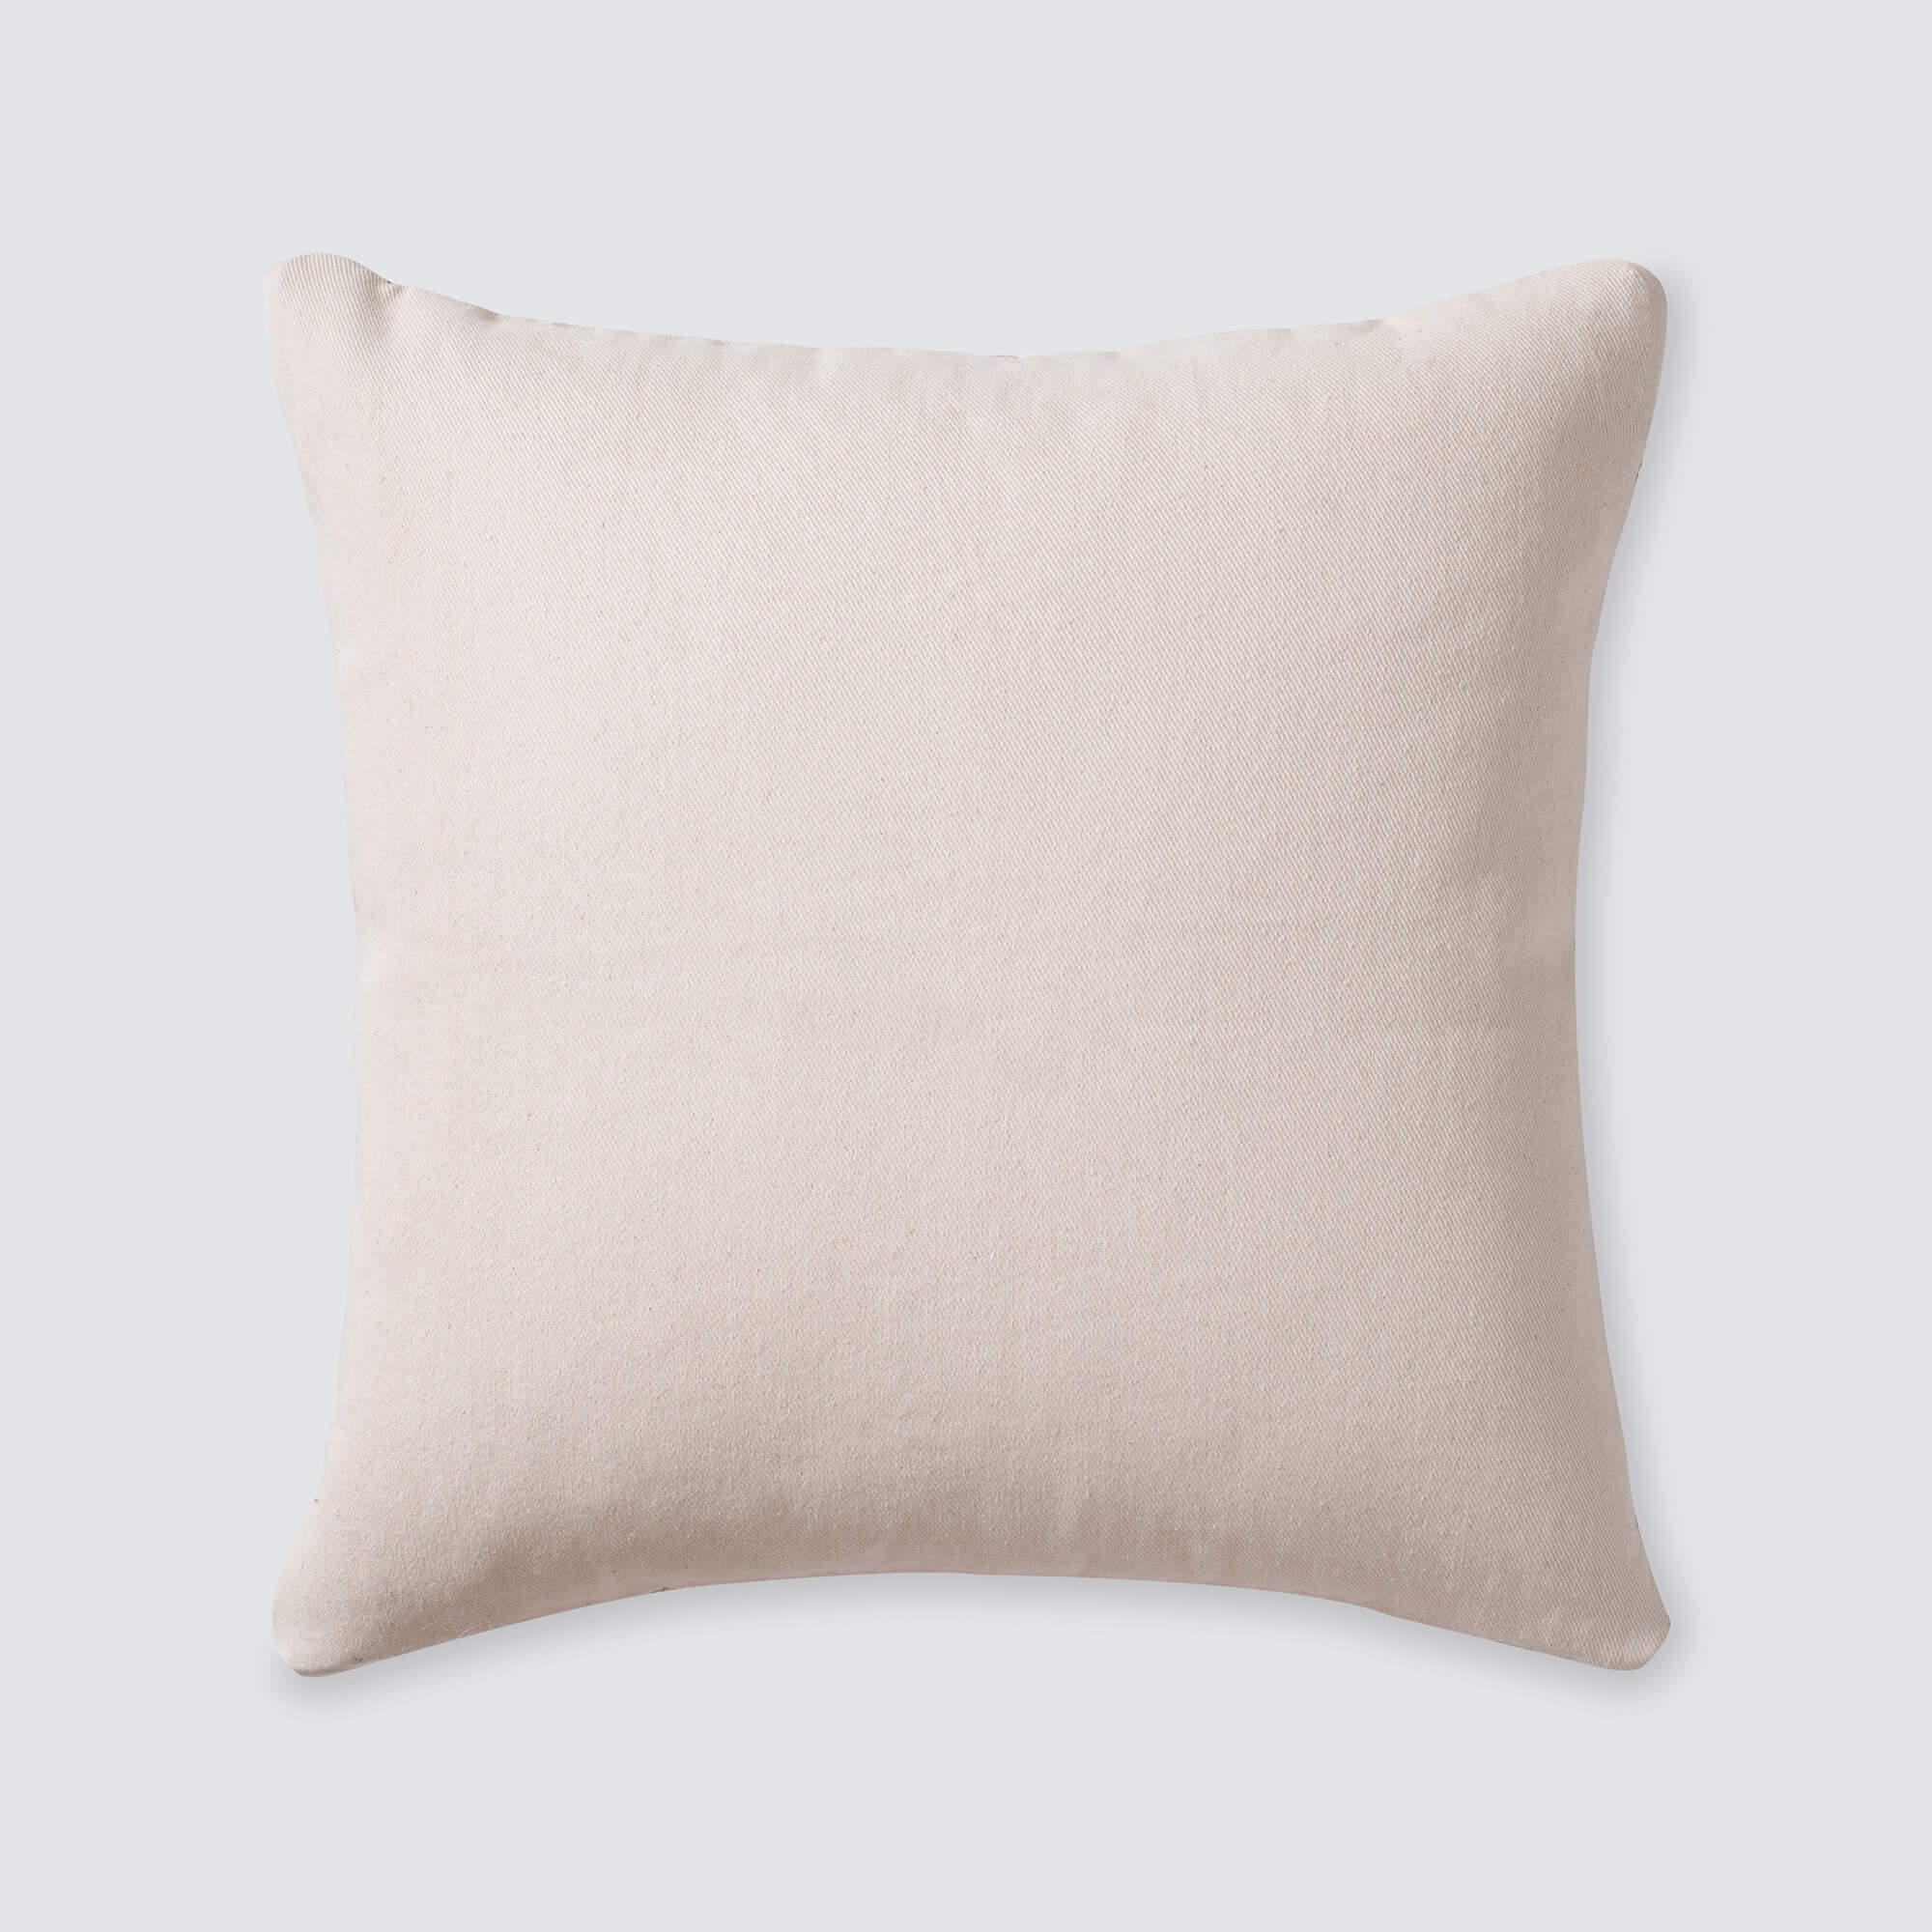 The Citizenry Claro Pillow | 22" x 22" | Camel - Image 5